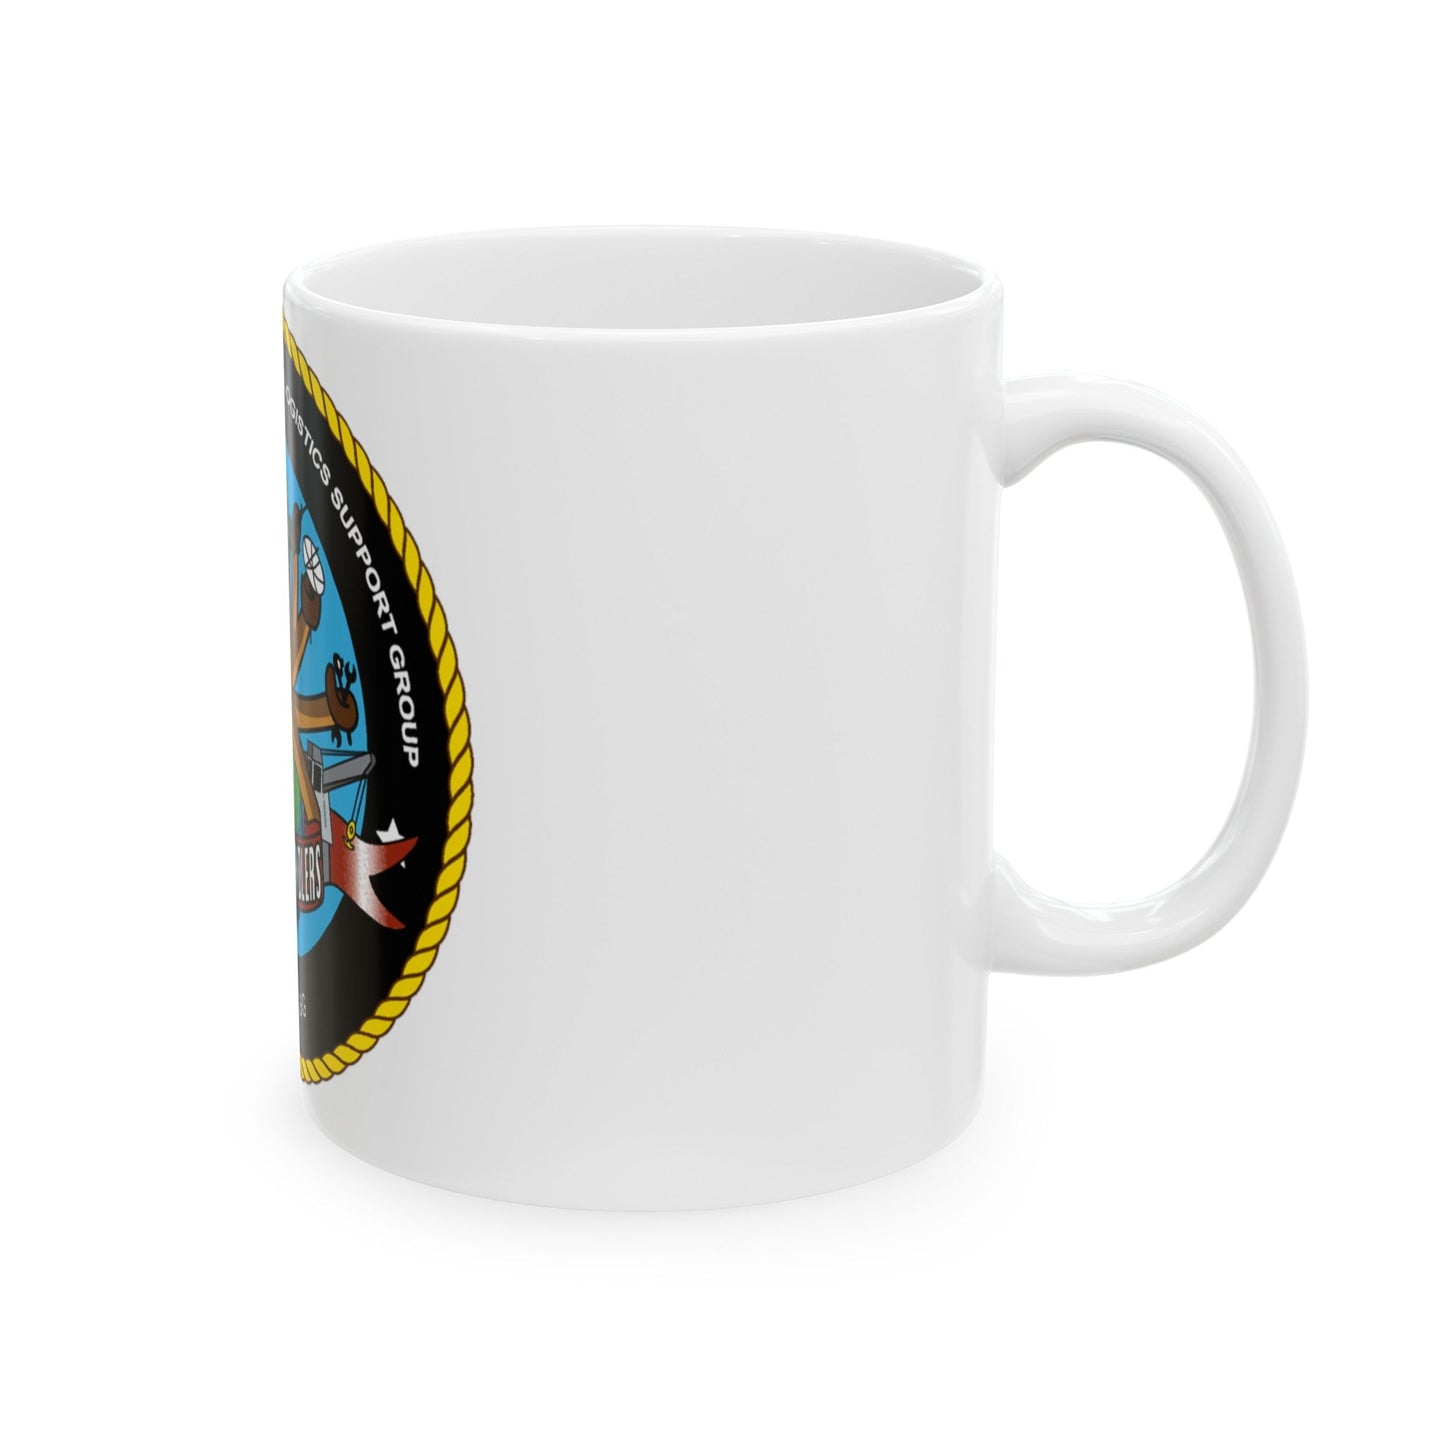 COMNAVELSG Cargo Handlers Commander Navy Expeditionary Logistics Support Group (U.S. Navy) White Coffee Mug-The Sticker Space